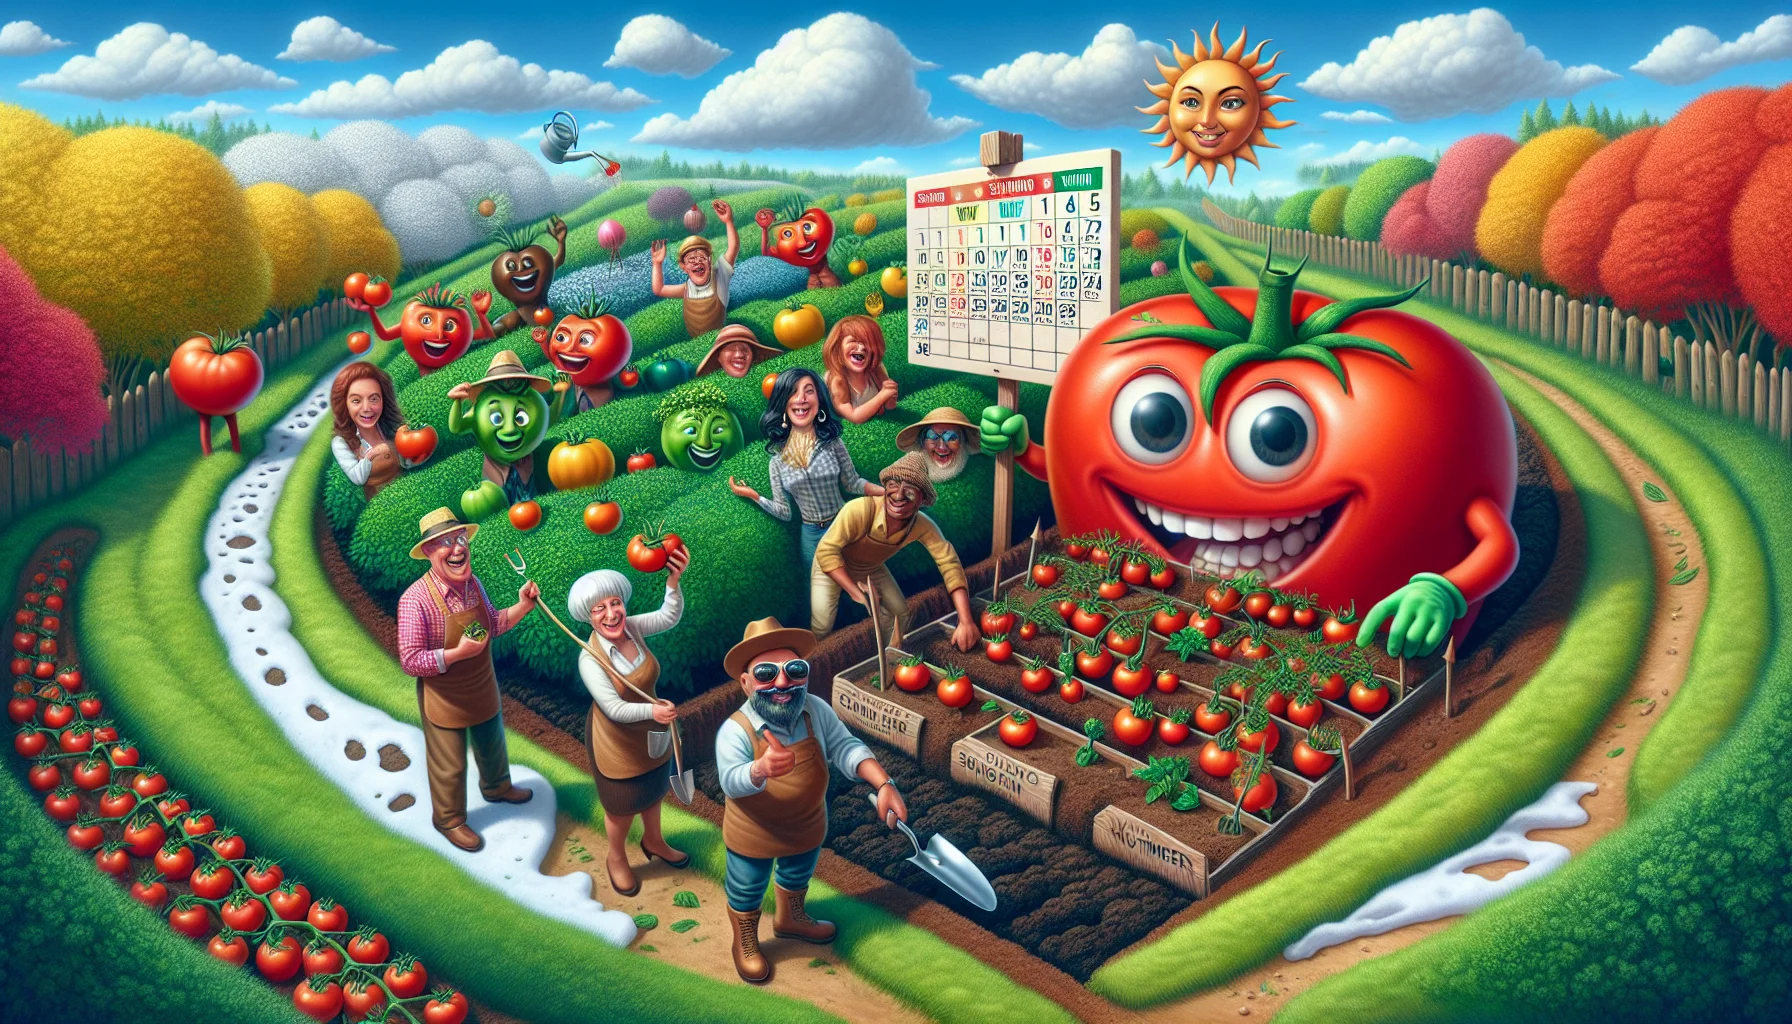 Create an amusing and realistic imagery that tells the story of when to plant tomatoes. Picture a lush garden under a sky with seasons indicated by pictorial elements - blooming flowers for spring, sunshine for summer, falling leaves for autumn, and snowy terrain for winter. A charismatic, multi-racial group of gardeners, both male and female, of various ages and body-types, are cheerfully planting tomatoes in the section marked 'spring' using an oversized, cartoonish calendar embedded in the soil. To add to the fun, a group of anthropomorphic tomatoes are gleefully guiding them, holding instructional signs conveniently providing the apt date and season for planting tomatoes.